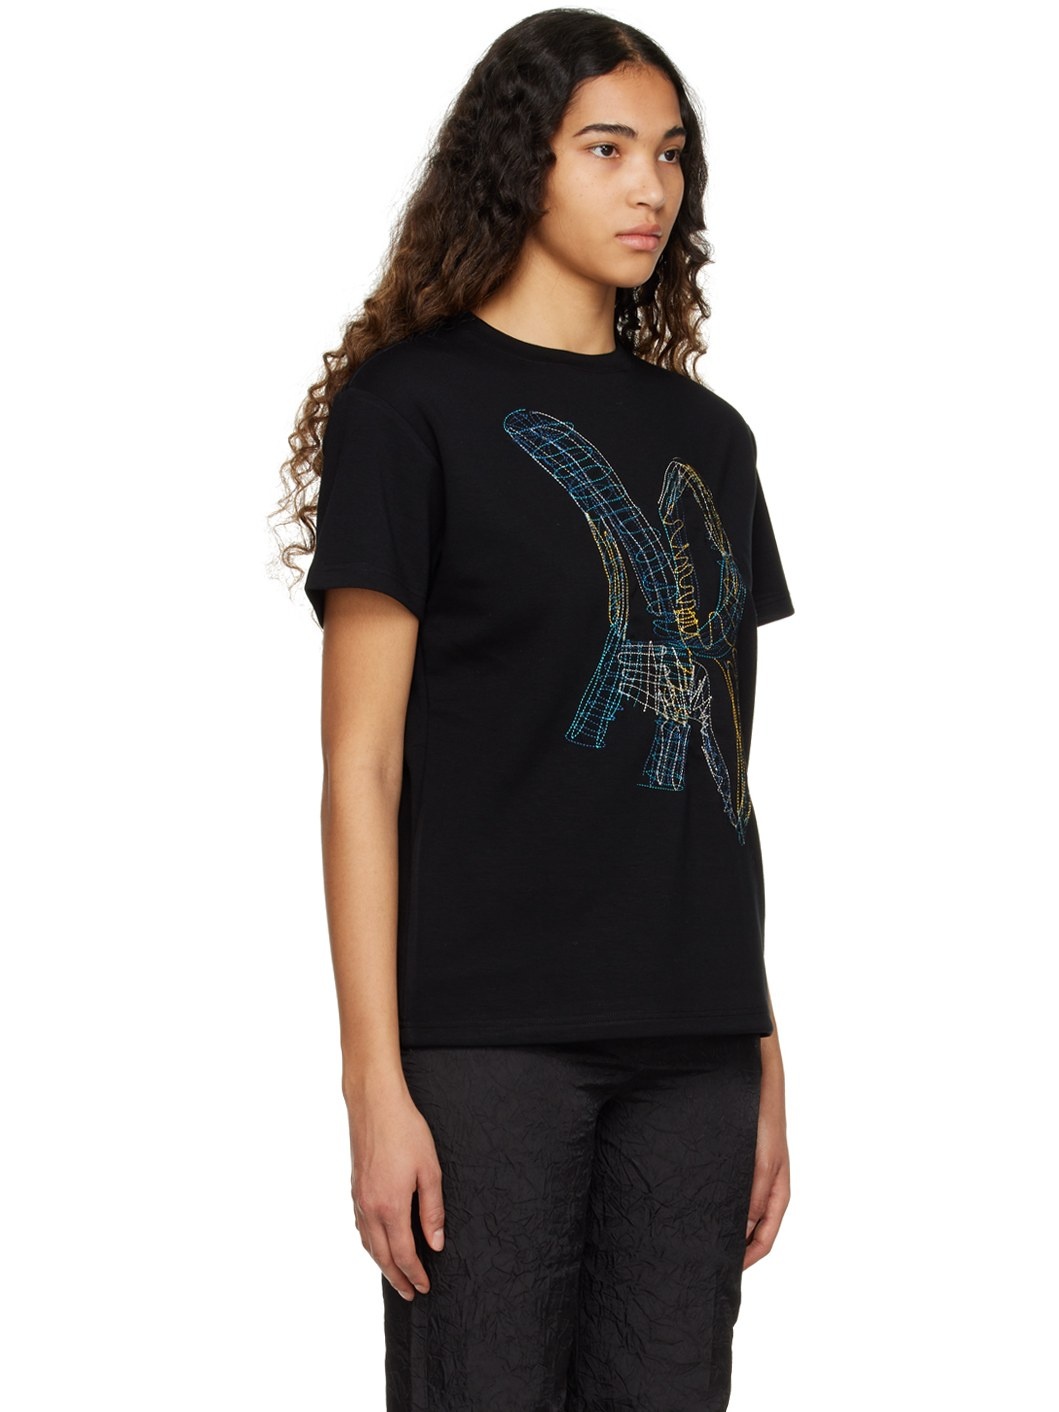 Black 'AB' Embroidered T-Shirt - 2